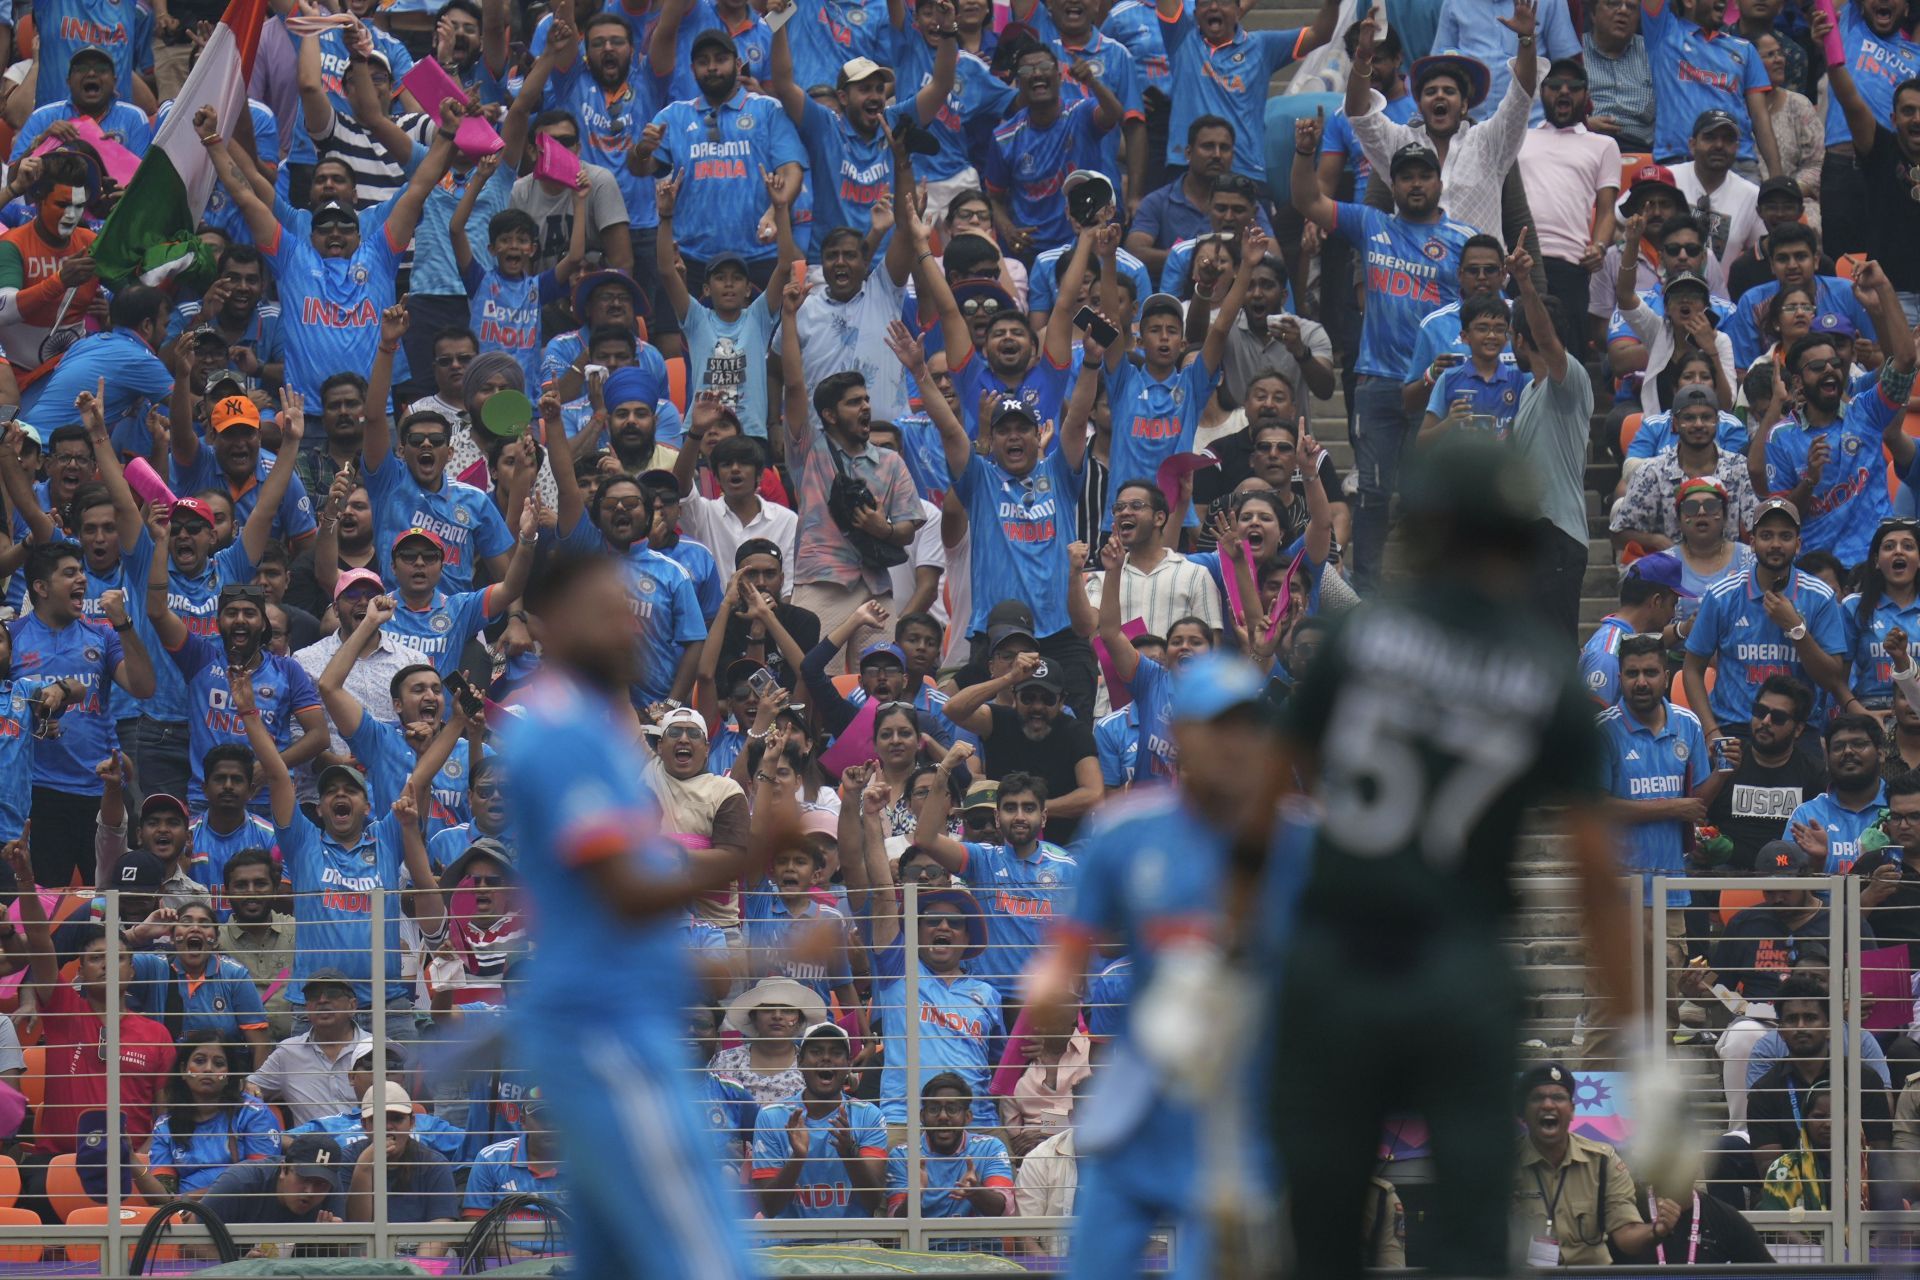 Indian fans cheer after a Pakistan wicket falls during the World Cup match. (Pic: AP)